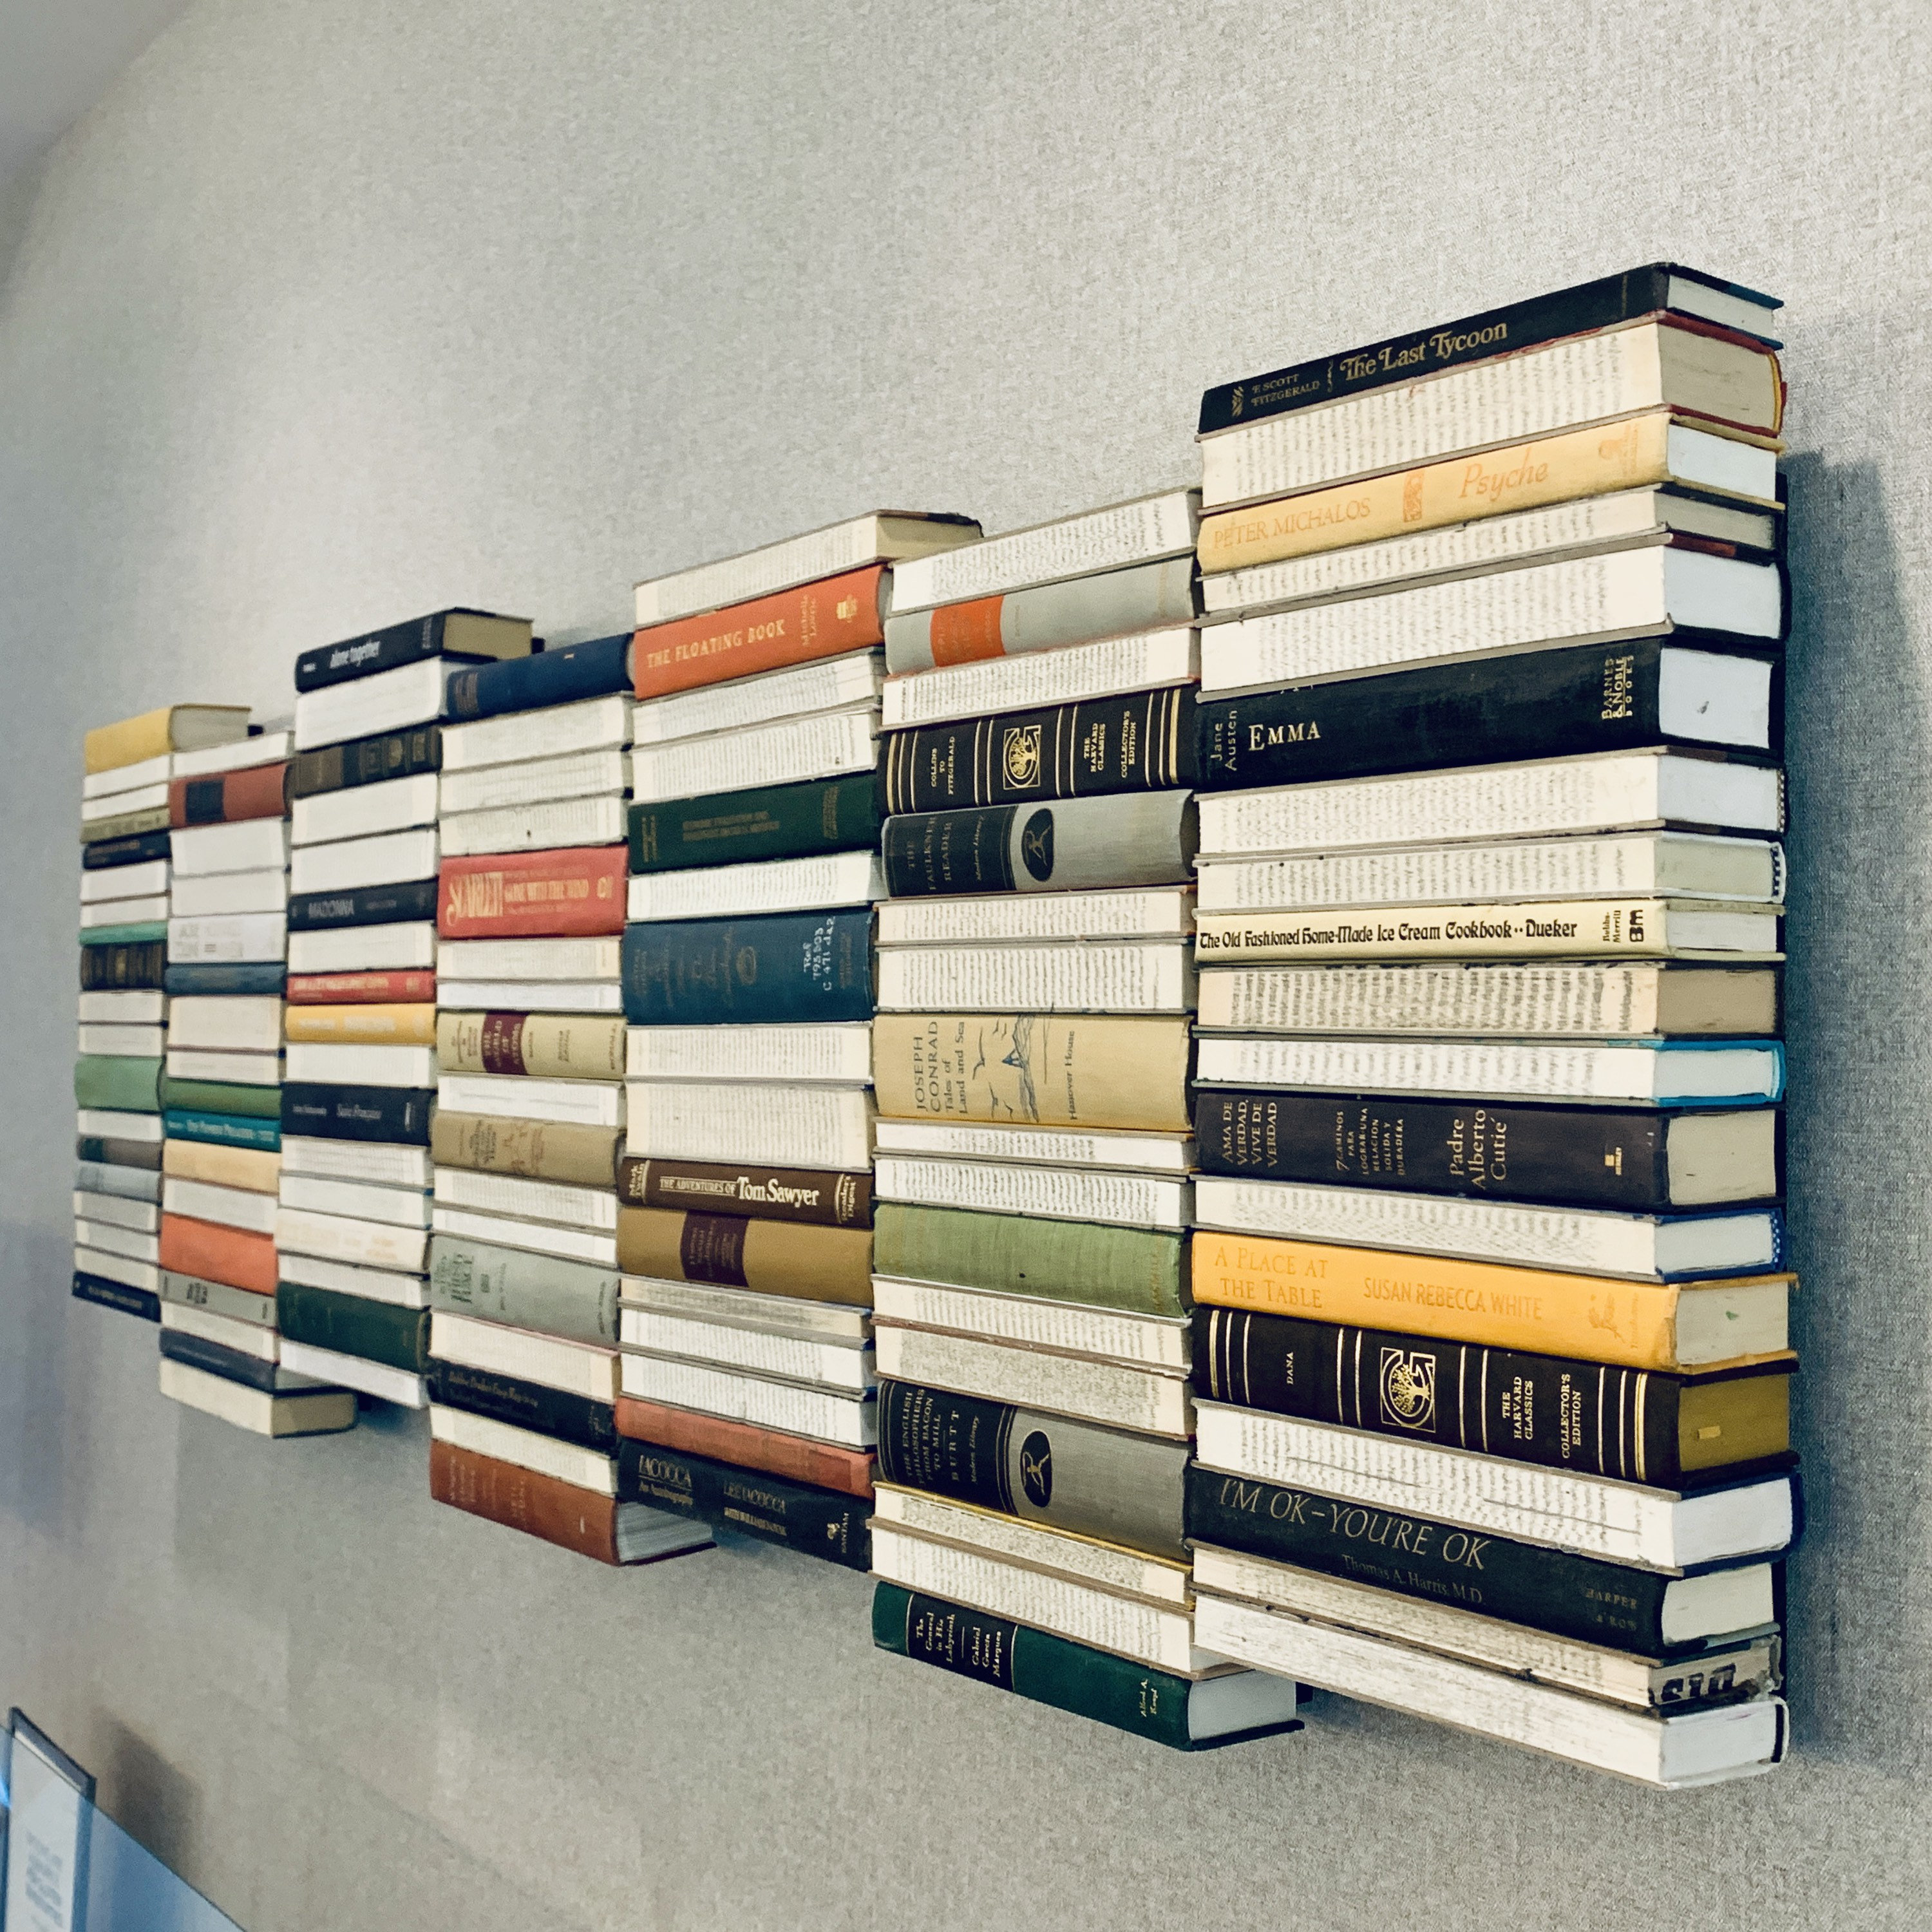 Fashion Inspired Decorative Books - Hardcover Fake Decorative Books for Coffee Table/Shelves with No Pages - Lightweight Aesthetic Book Display